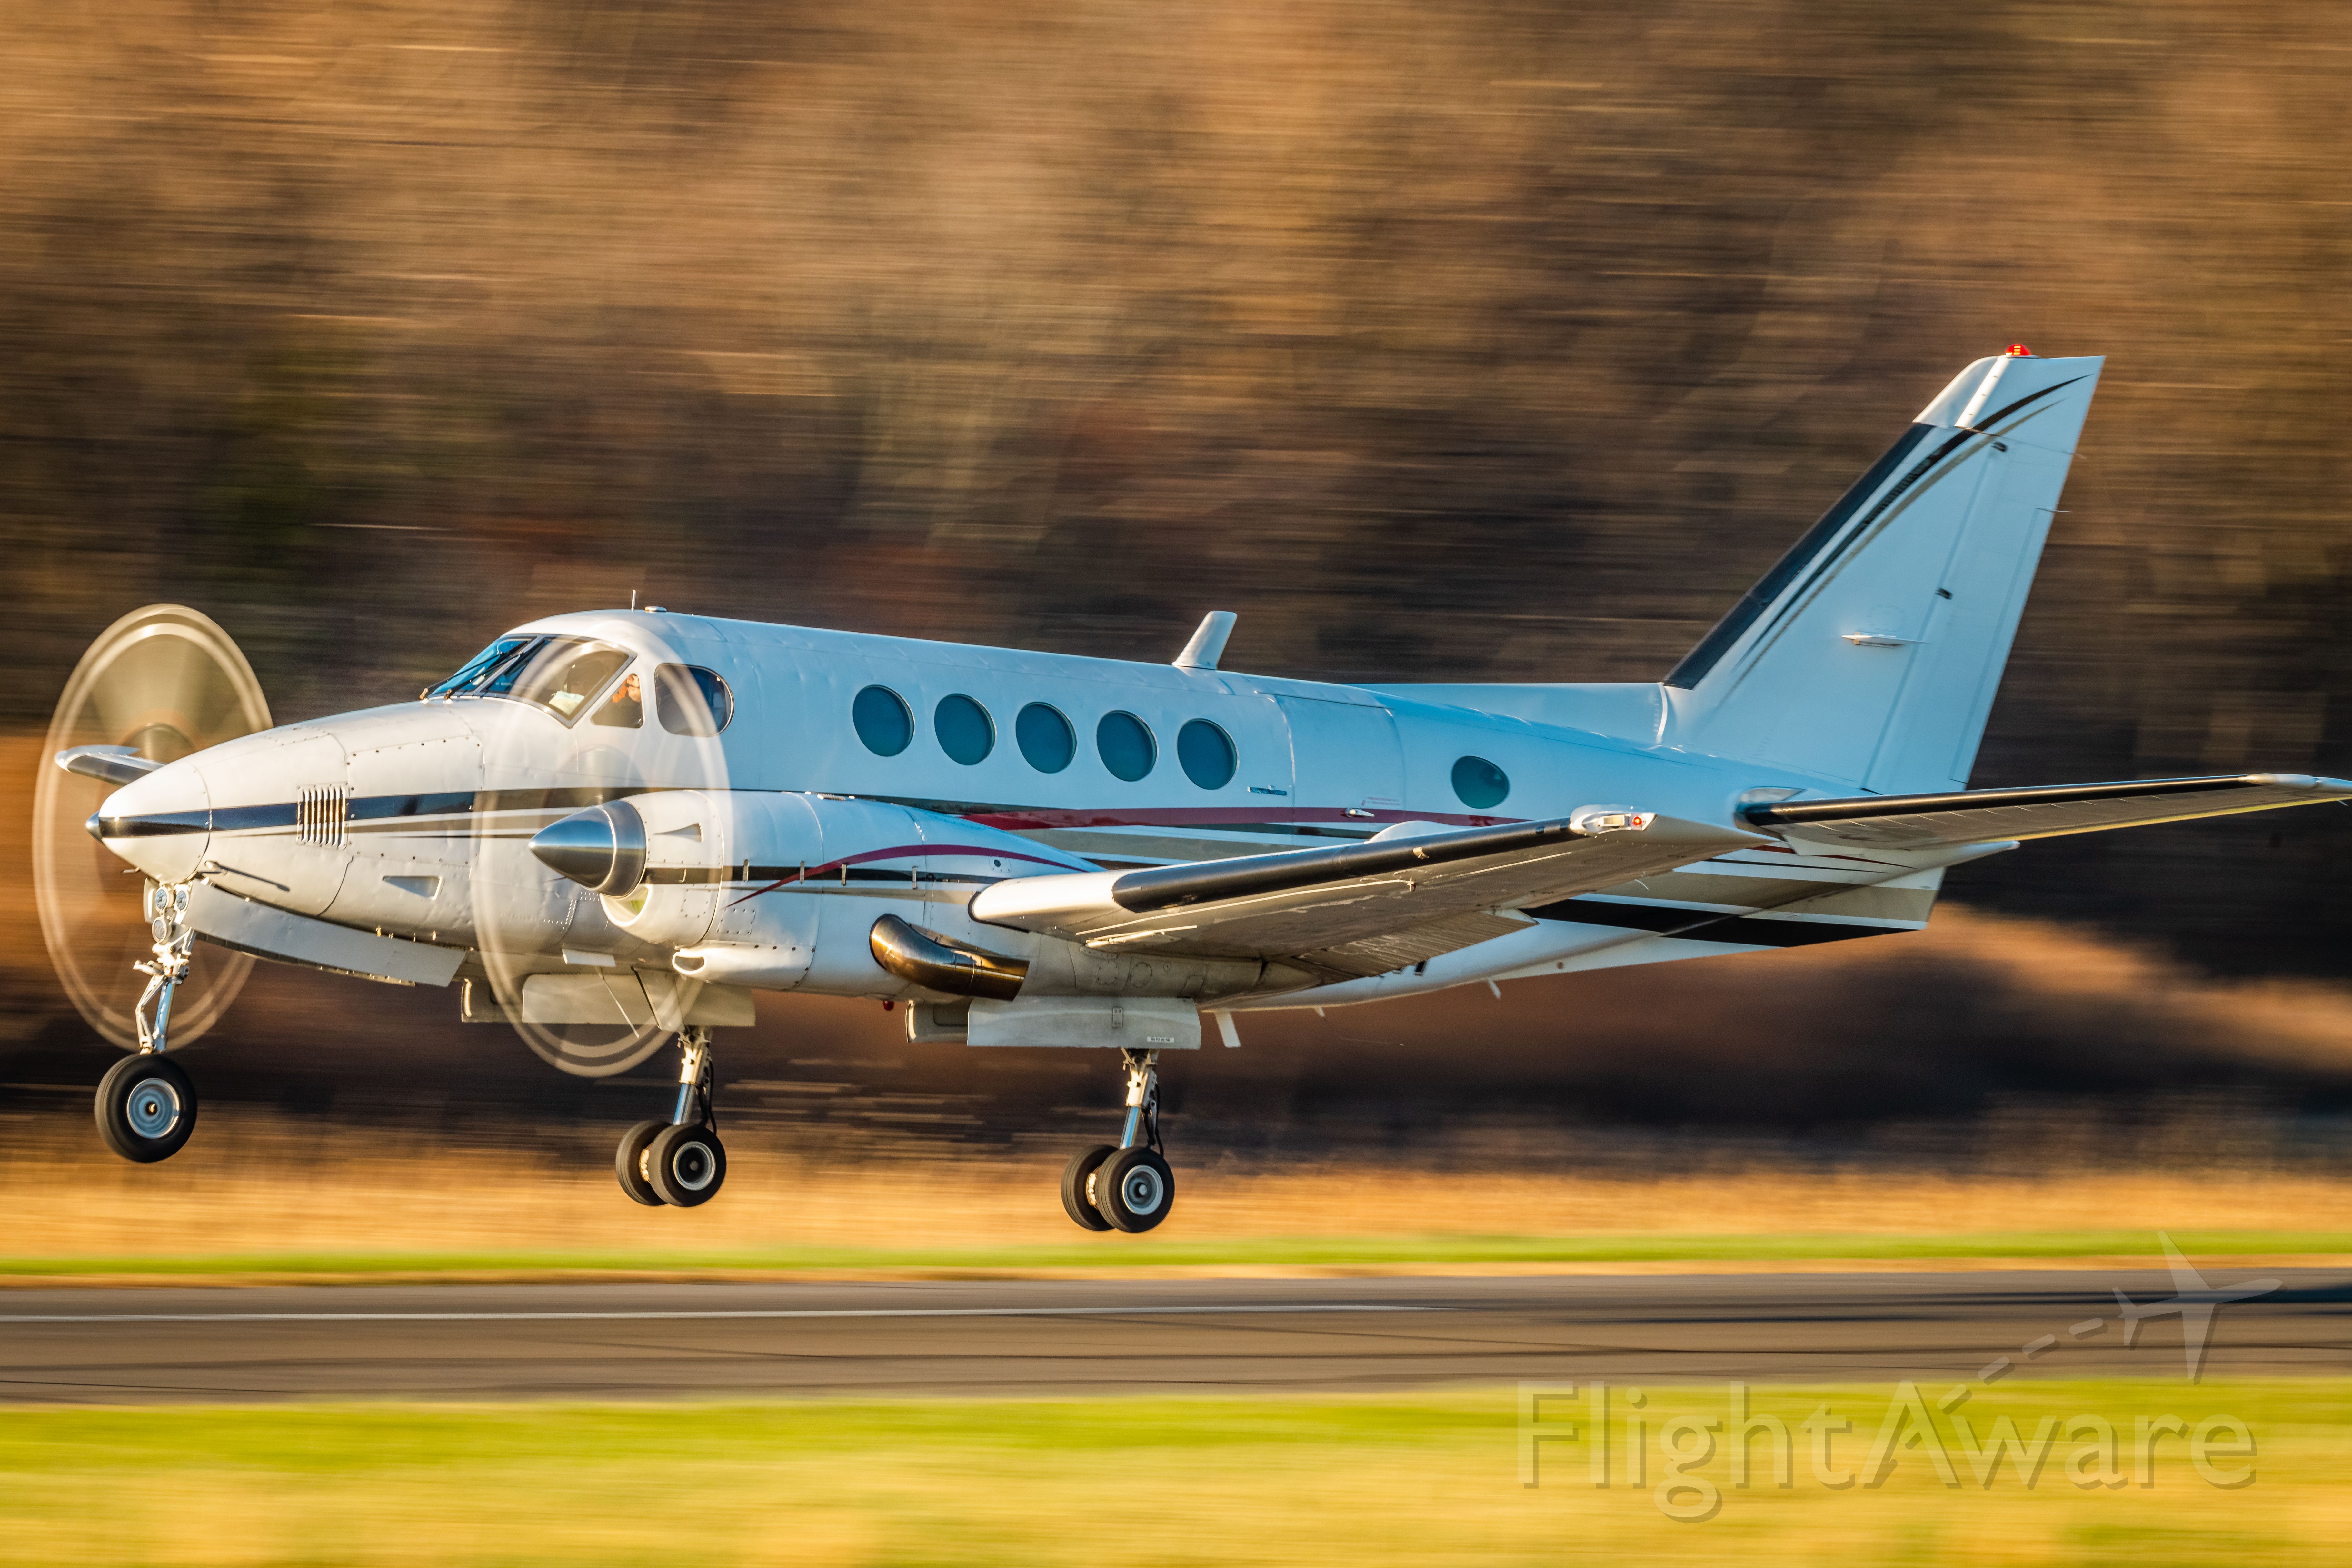 Beechcraft King Air 100 (N68DA) - Beechcraft King Air 100, N68DA taking off from KLOM during an autumn afternoon.